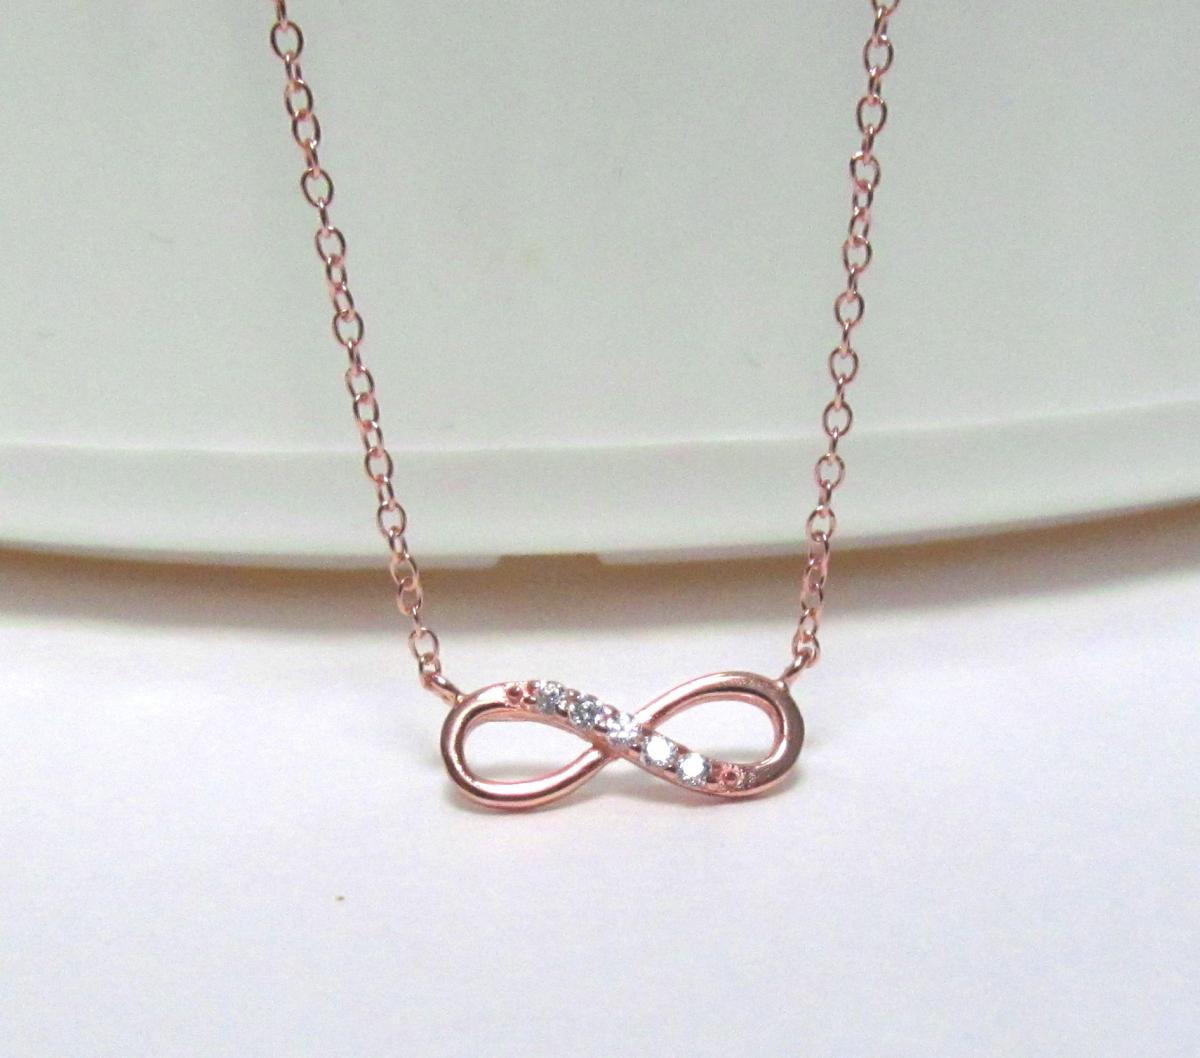 Infinity Necklace-petite Rose Gold Over 925 Sterling Silver Necklace With Cz-18 Inch Cable Chain